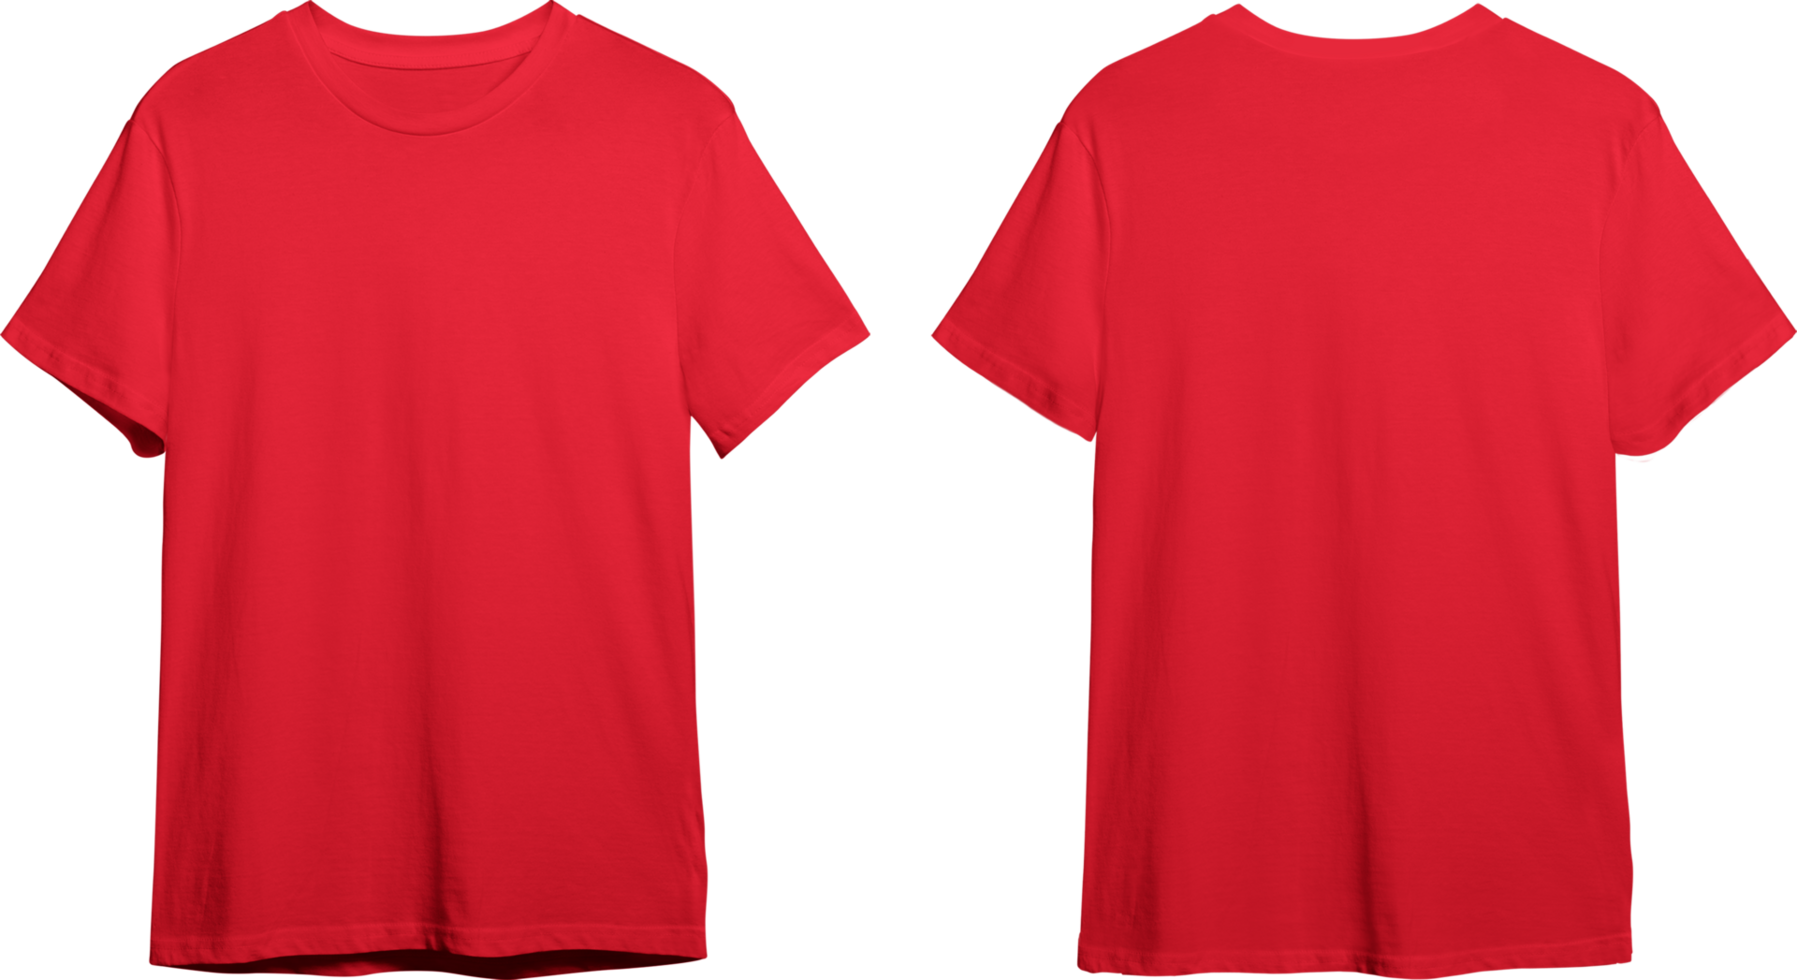 Red men's classic t-shirt front and back png